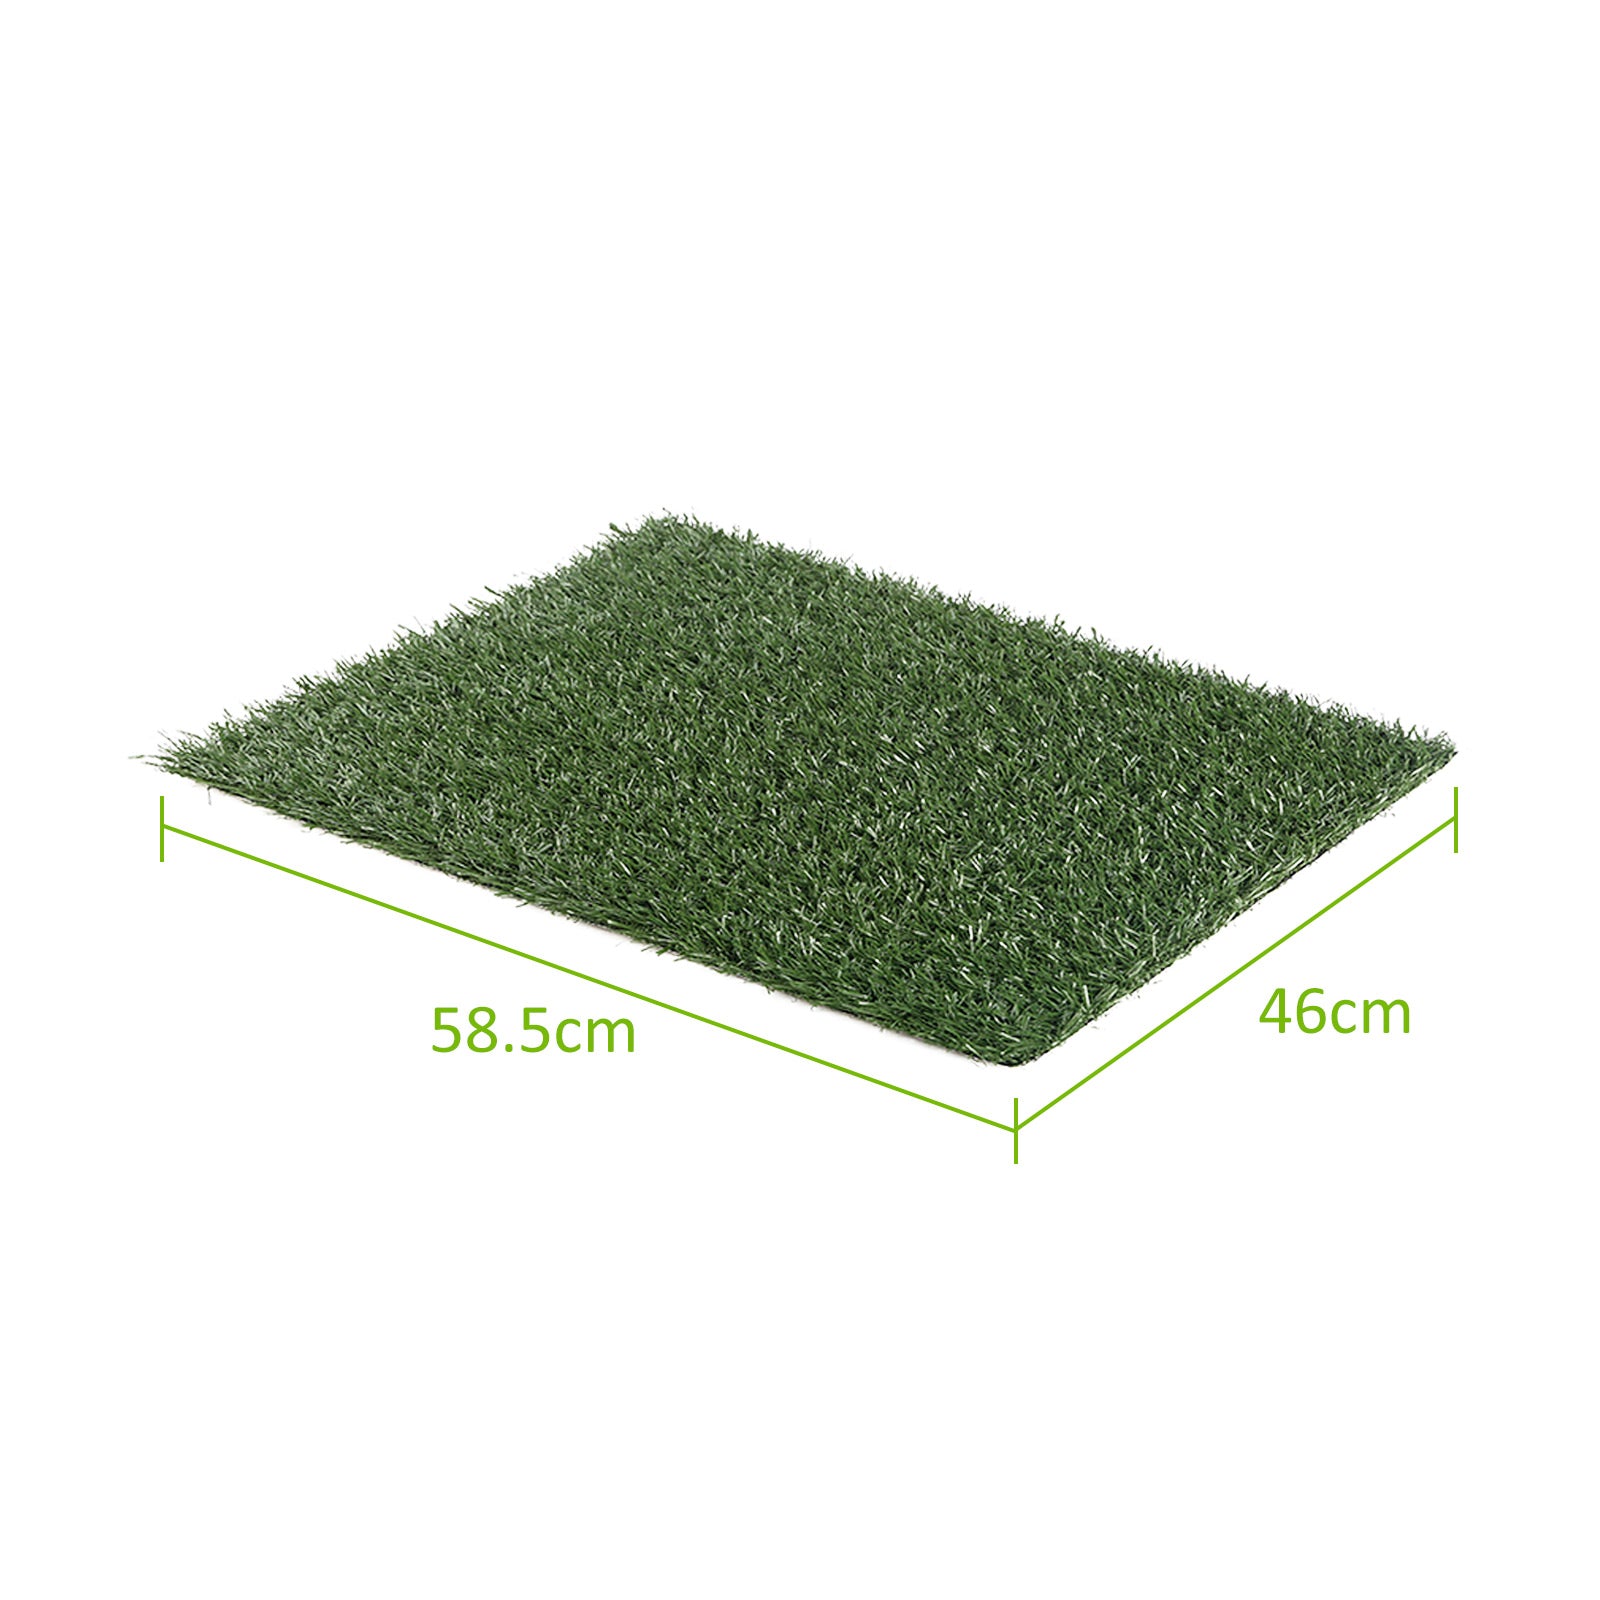 Paw Mate 1 Grass Mat for Pet Dog Potty Tray Training Toilet 58.5cm x 46cm